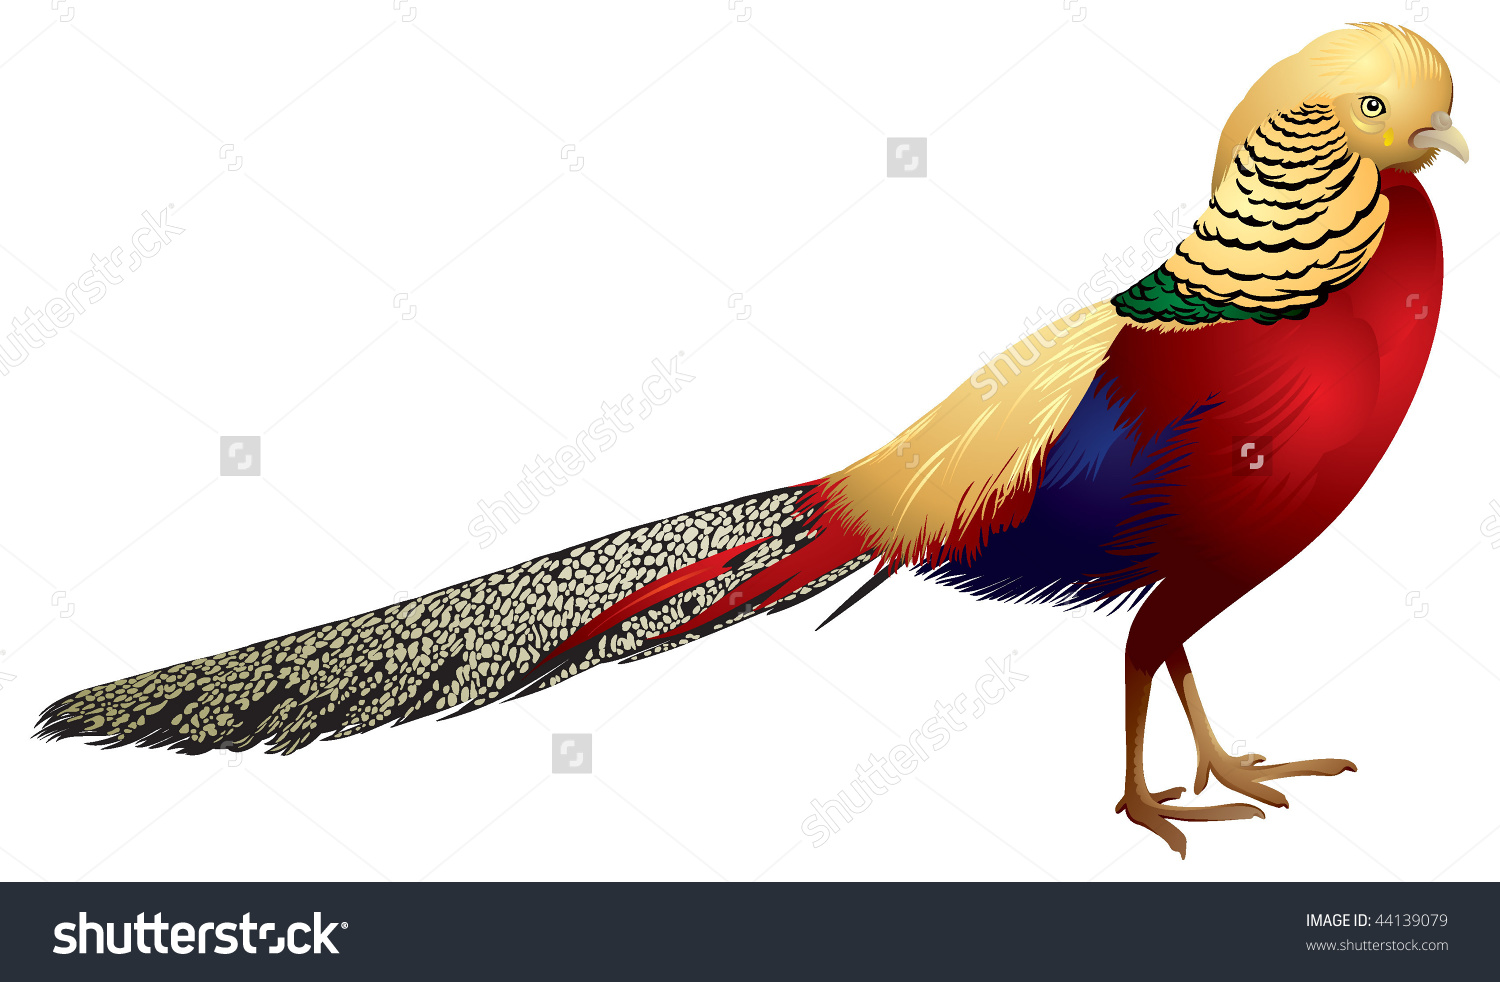 Golden Pheasant clipart #3, Download drawings